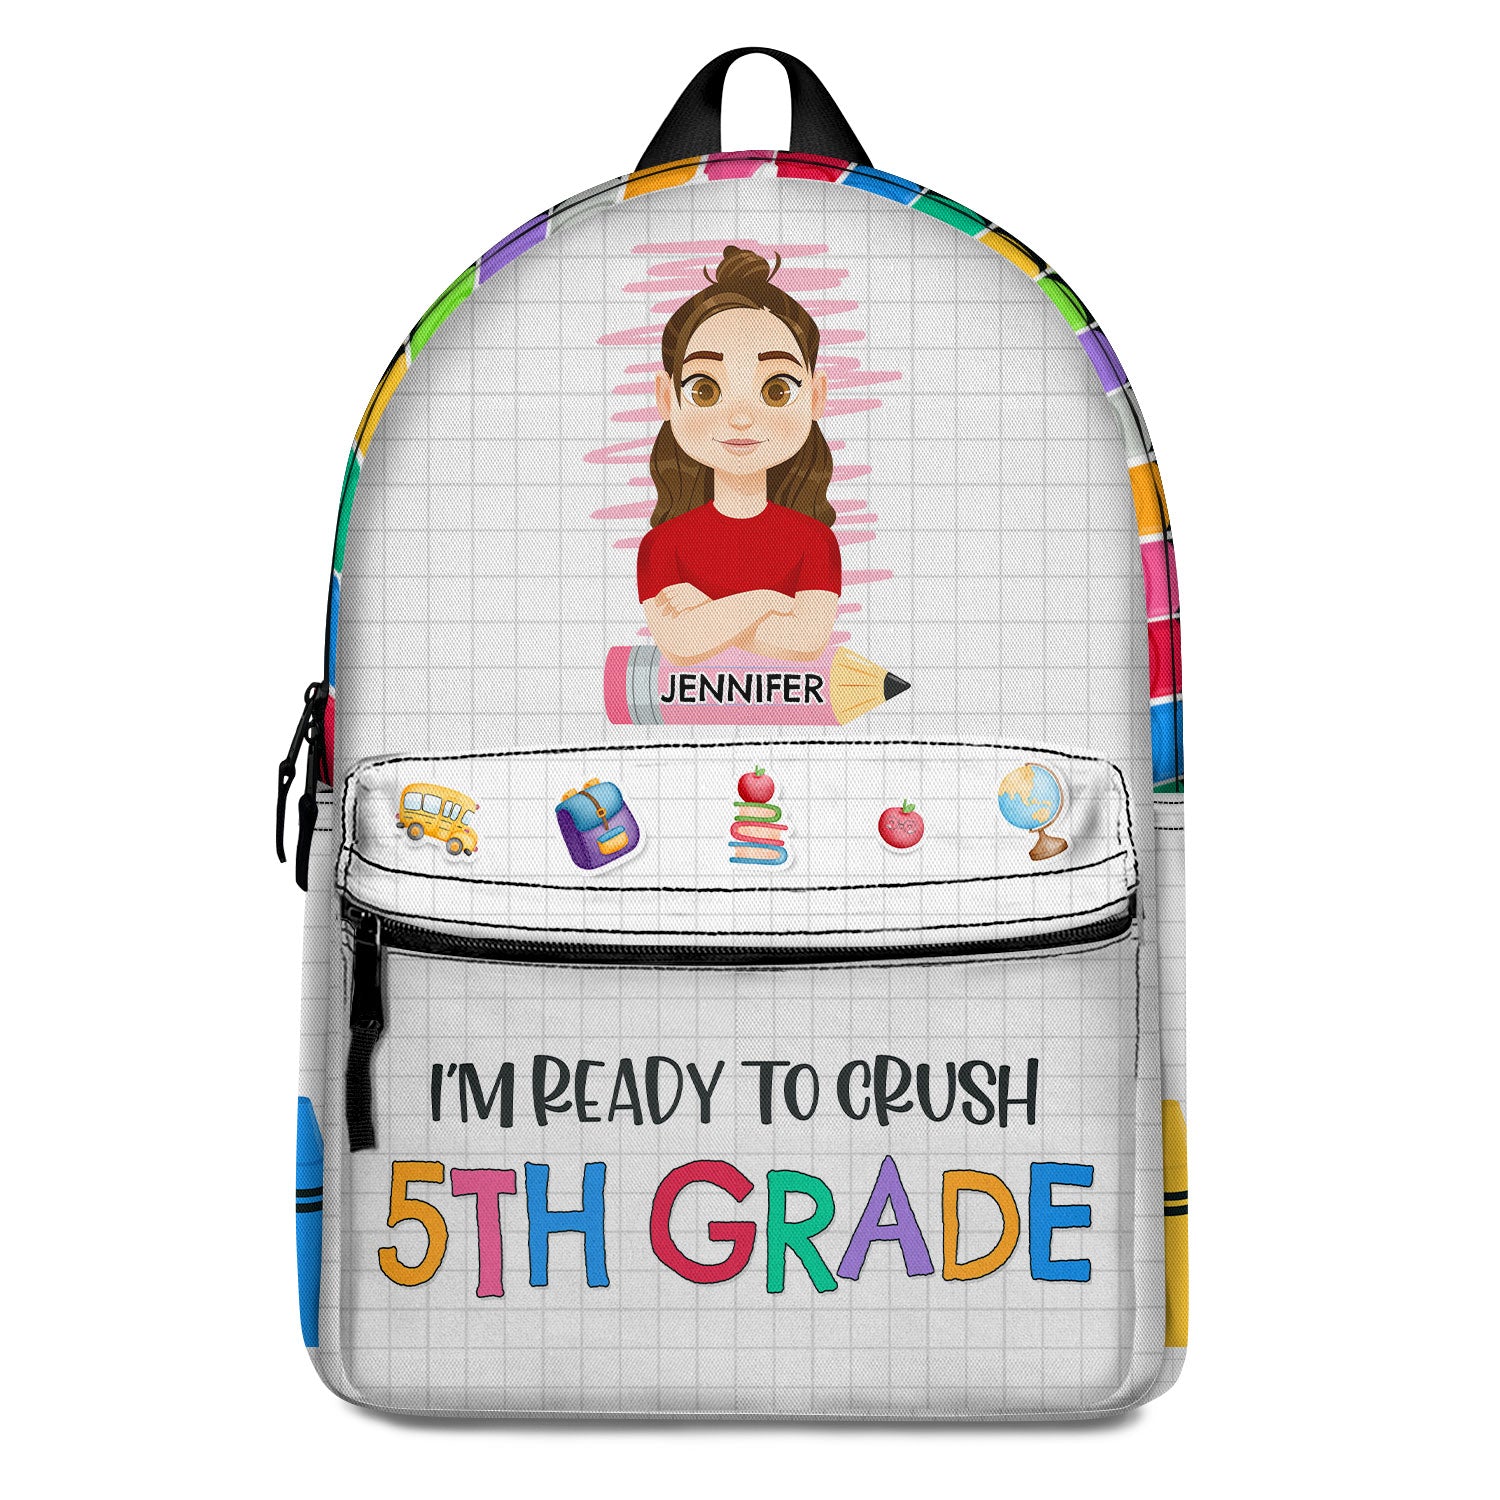 I'm Ready To Crush School - Gift For Kids, Back To School Gift - Personalized Canvas Backpack